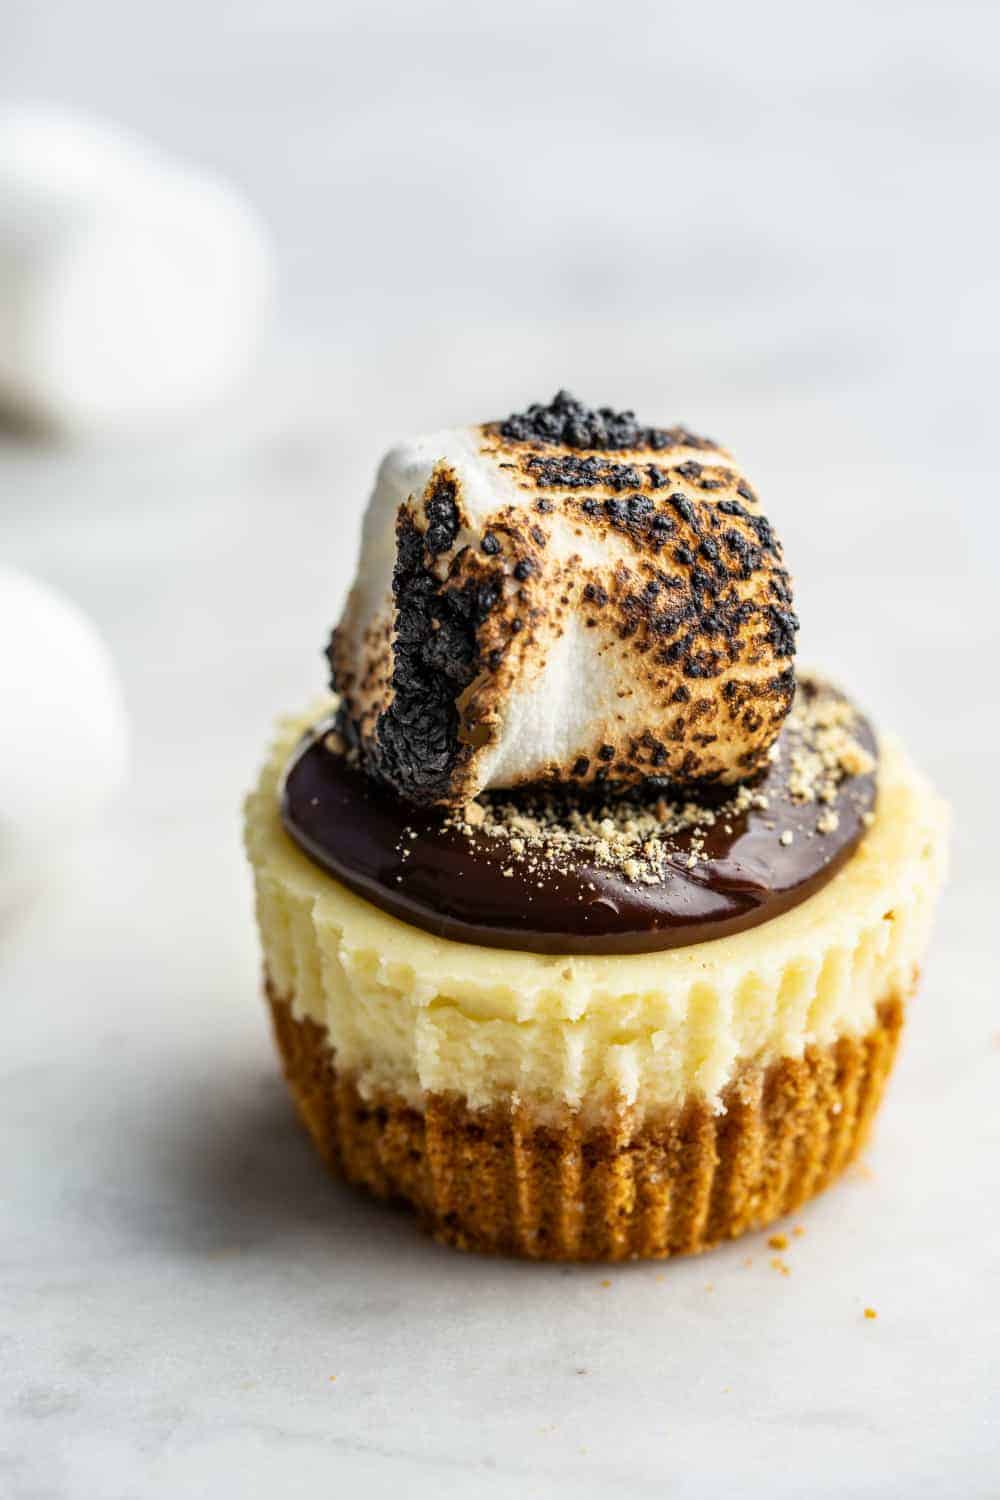 Mini s'mores cheesecake topped with a toasted marshmallow on a light background